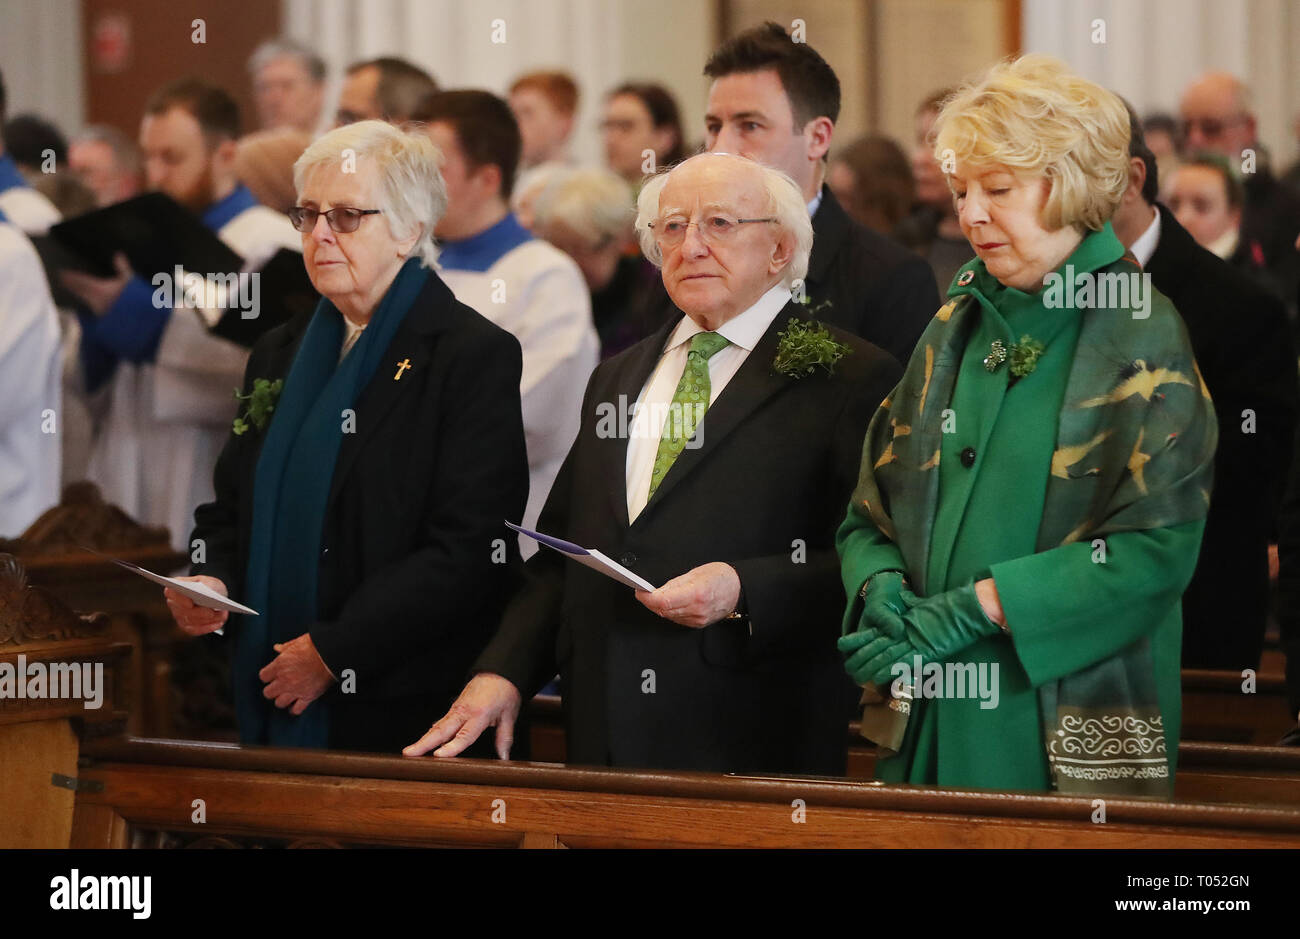 President Michael D Higgins and his wife Sabina (right) attend a memorial service for the victims of the New Zealand Mosque attacks at St Marys Pro Cathederal in Dublin. Stock Photo